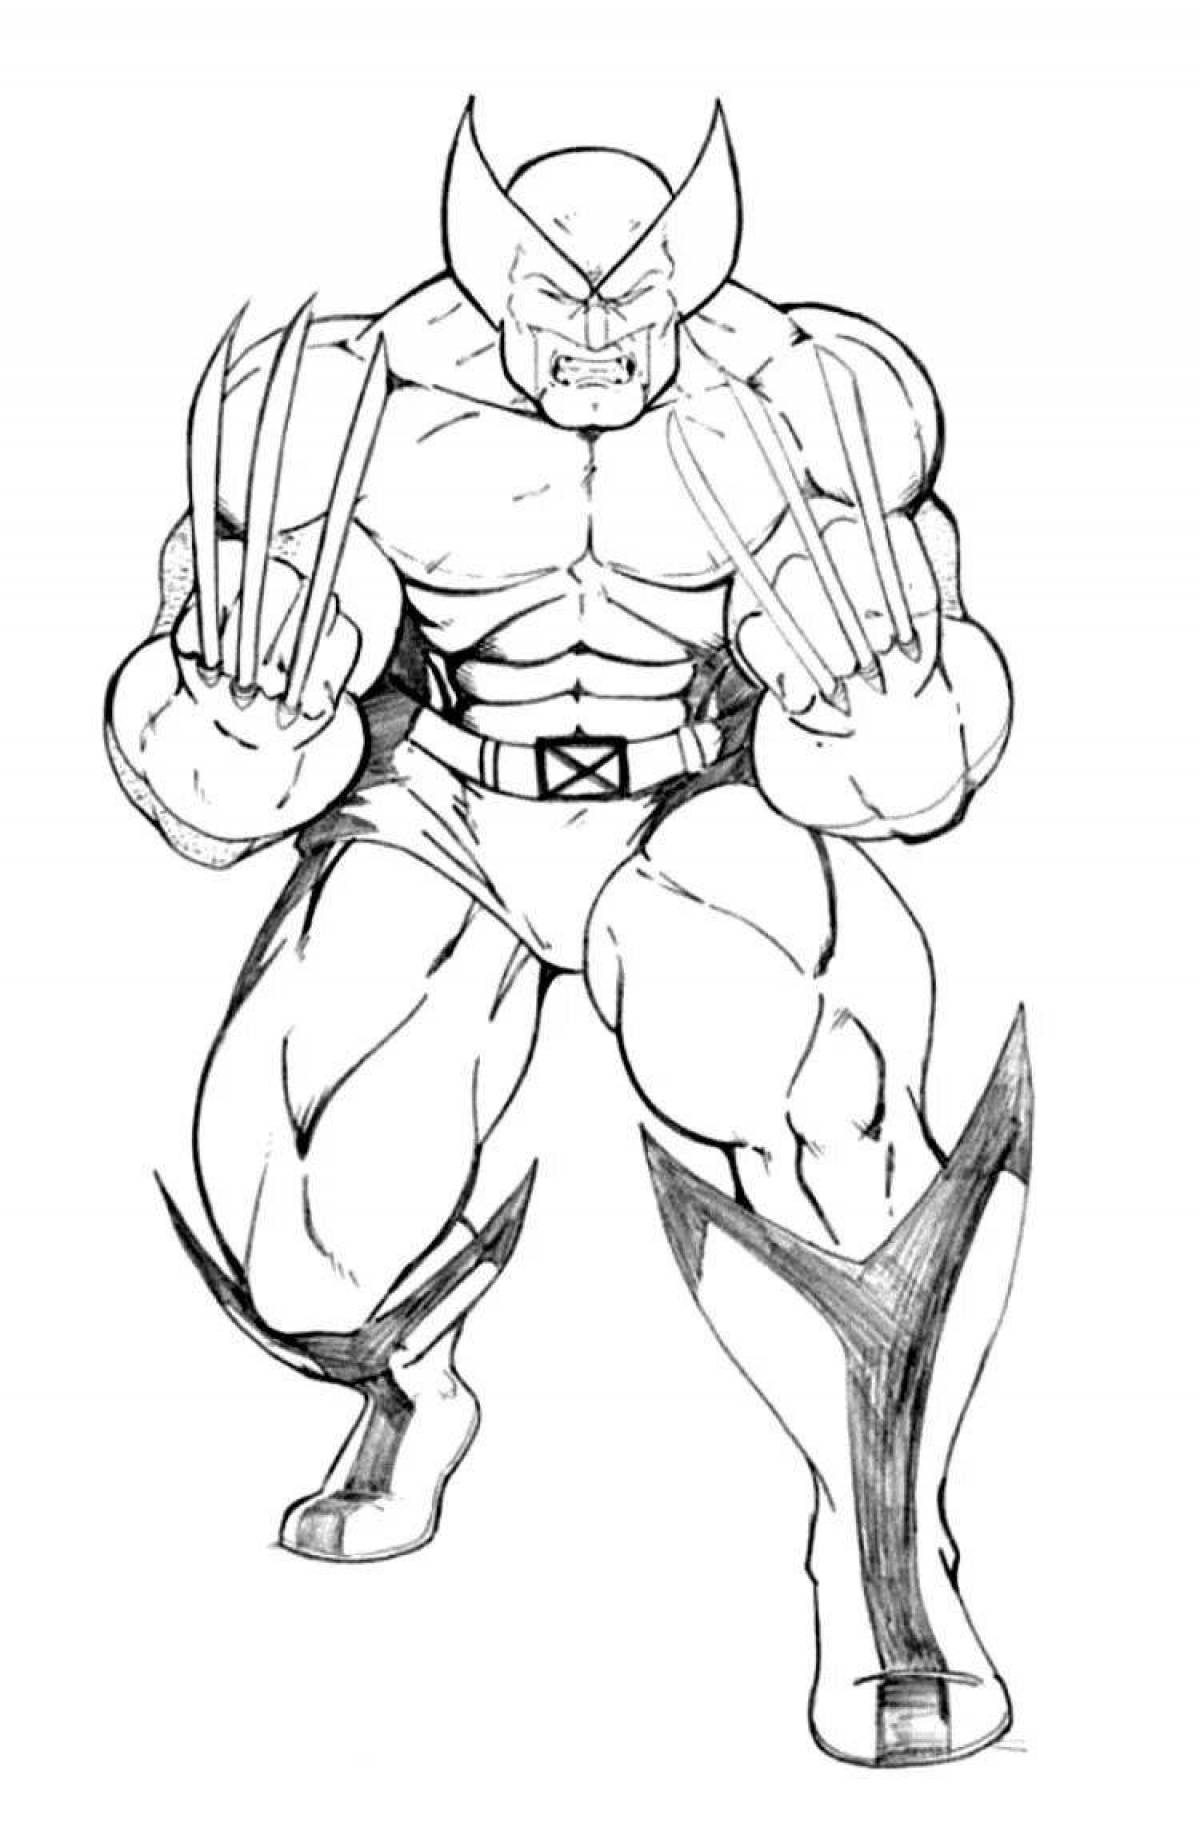 Wolverine fantasy coloring book for kids